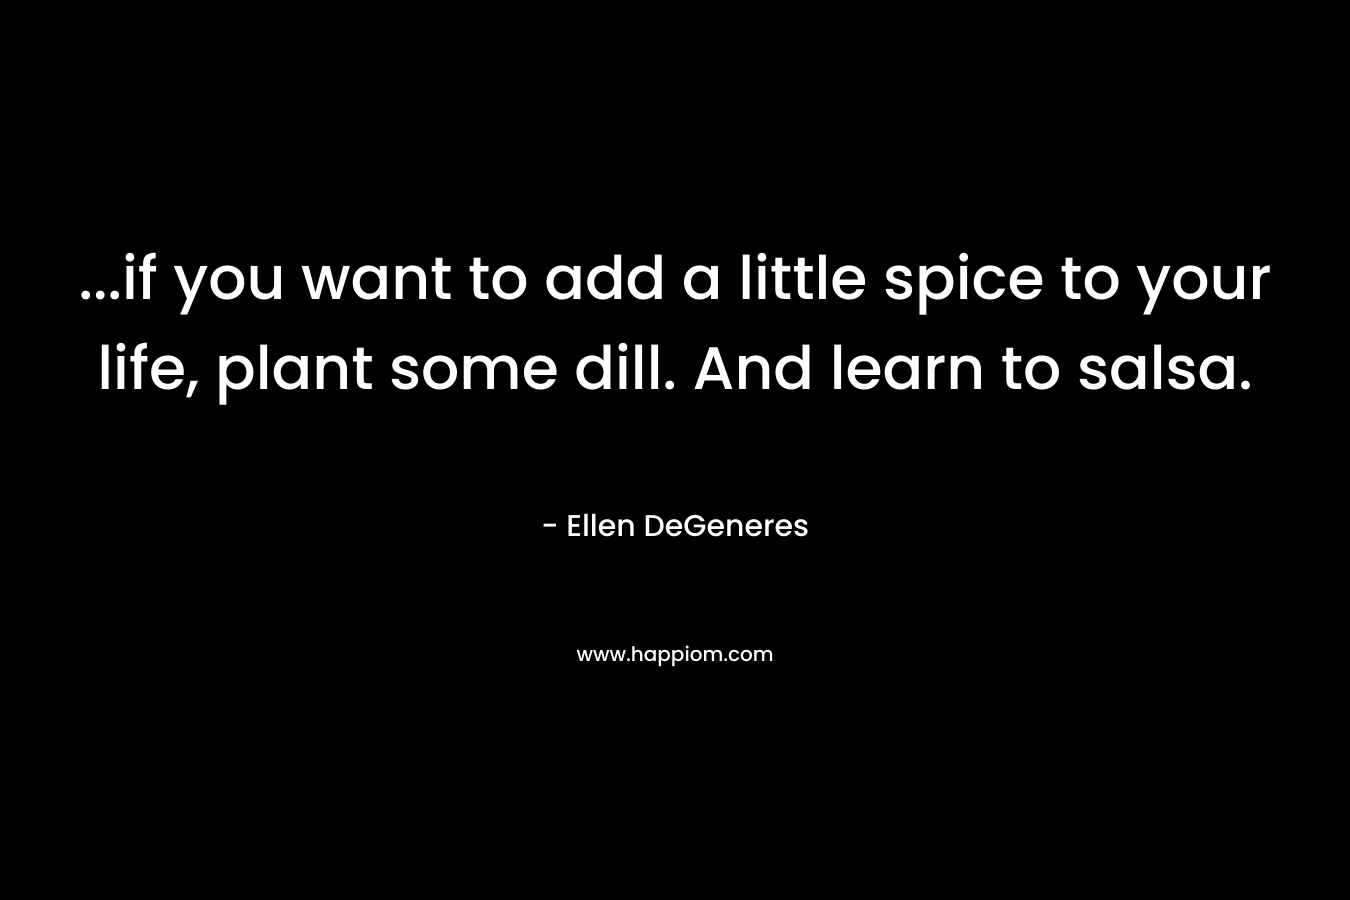 …if you want to add a little spice to your life, plant some dill. And learn to salsa. – Ellen DeGeneres